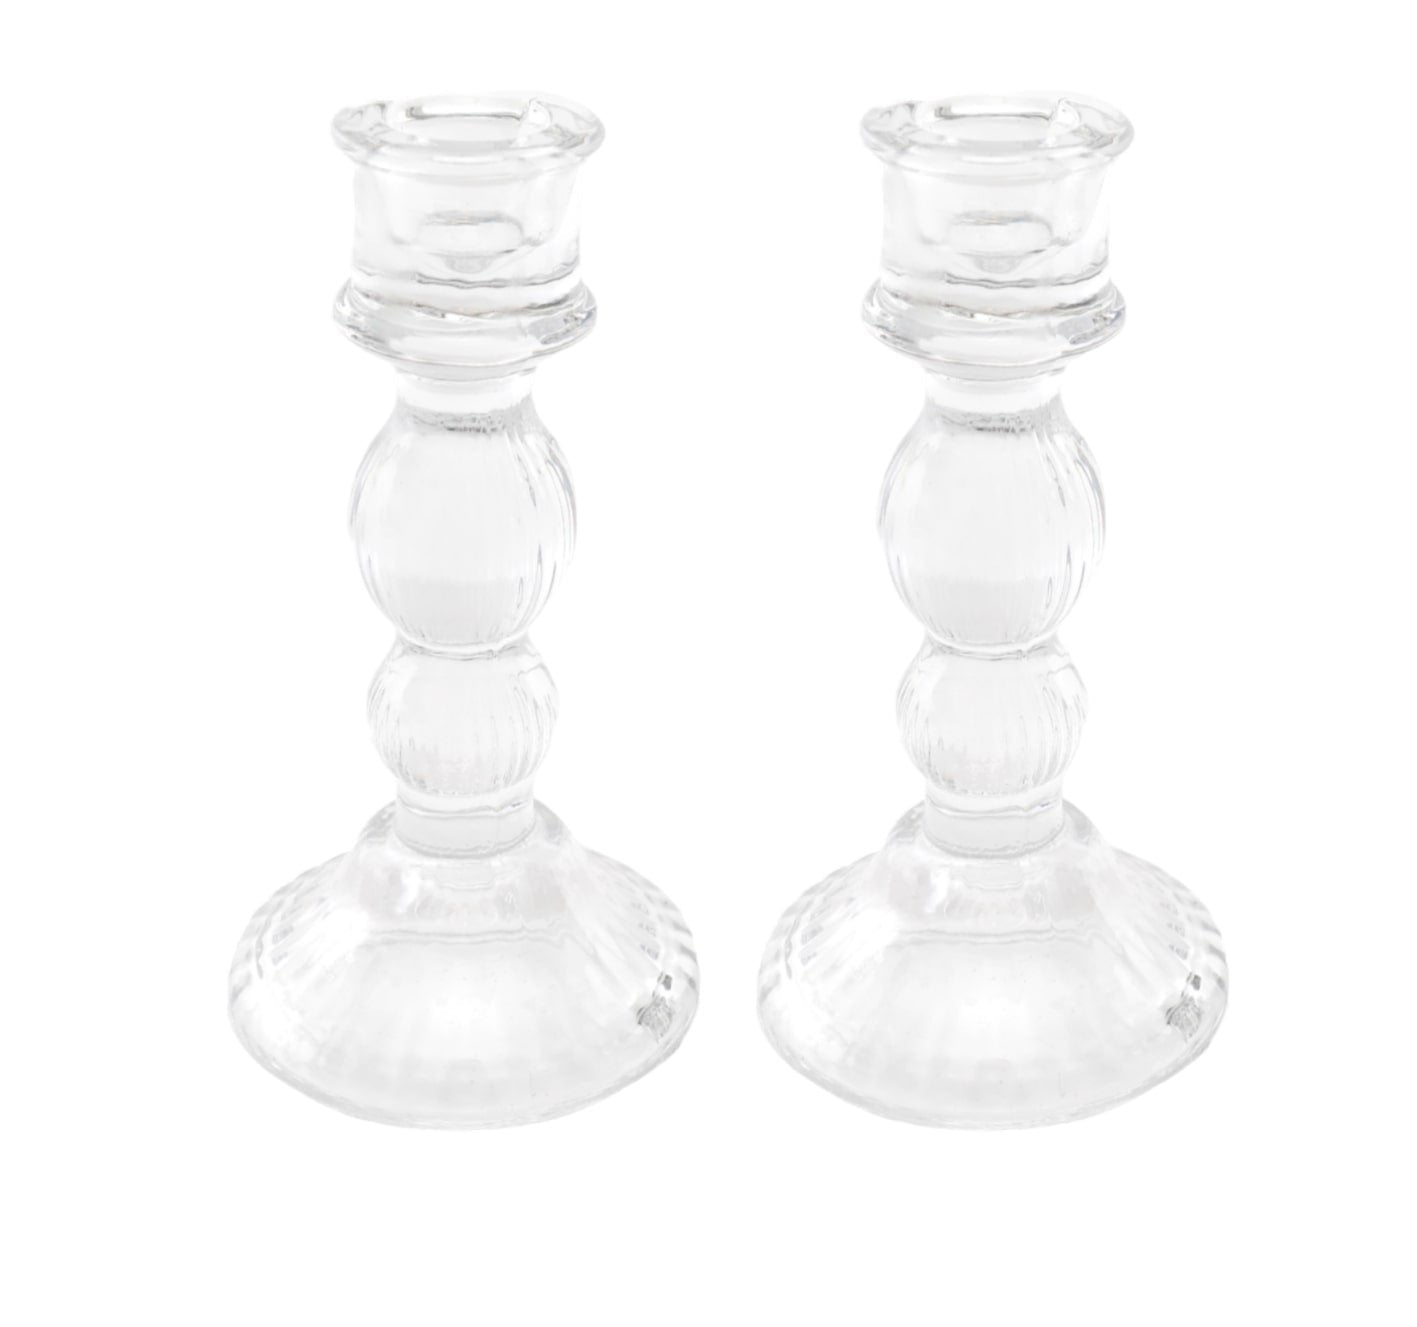 Pair of Glass Taper Candle Holders Clear - a Cheeky Plant